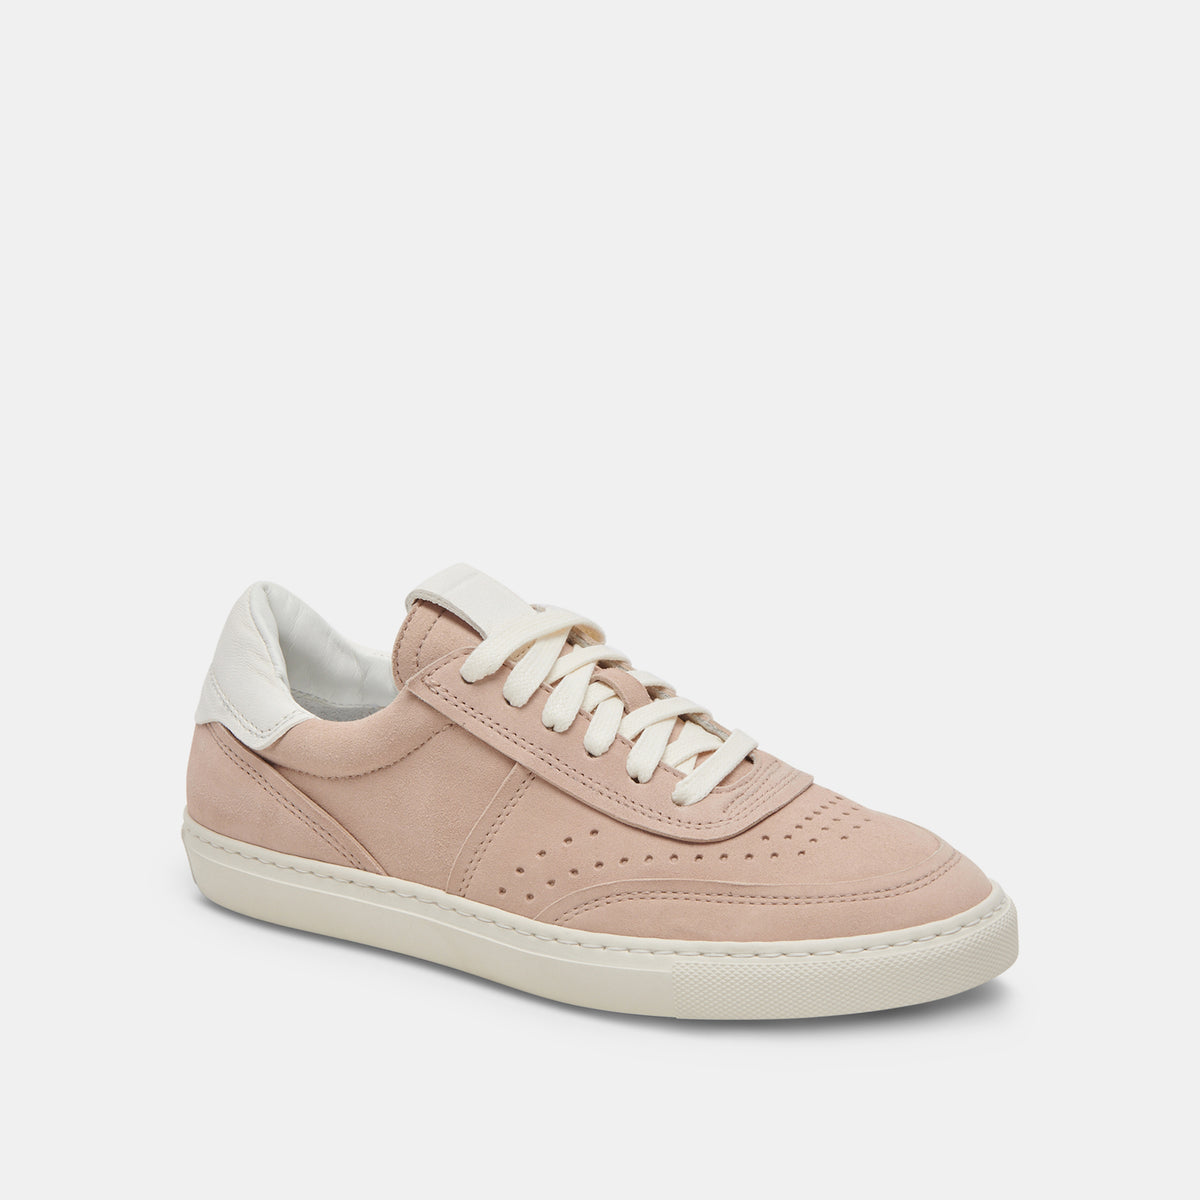 BODEN SNEAKERS DUNE SUEDE – Dolce Vita